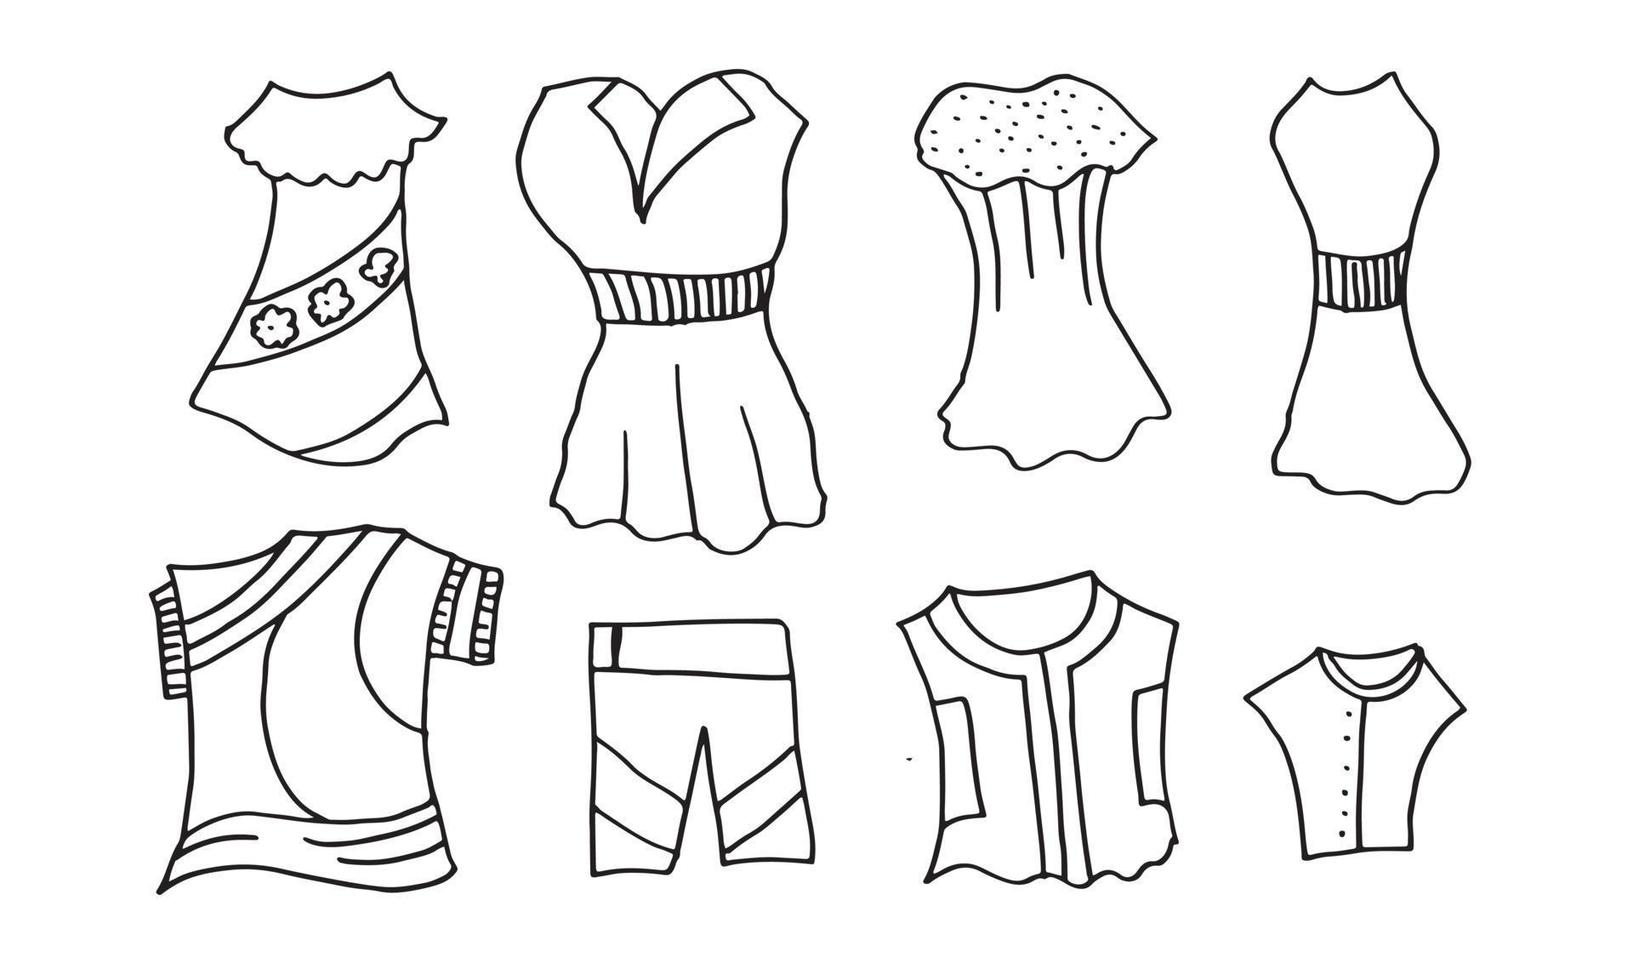 Doodle hand drawing with kid clothes. Vector illustration of lines and coloring pages for kids